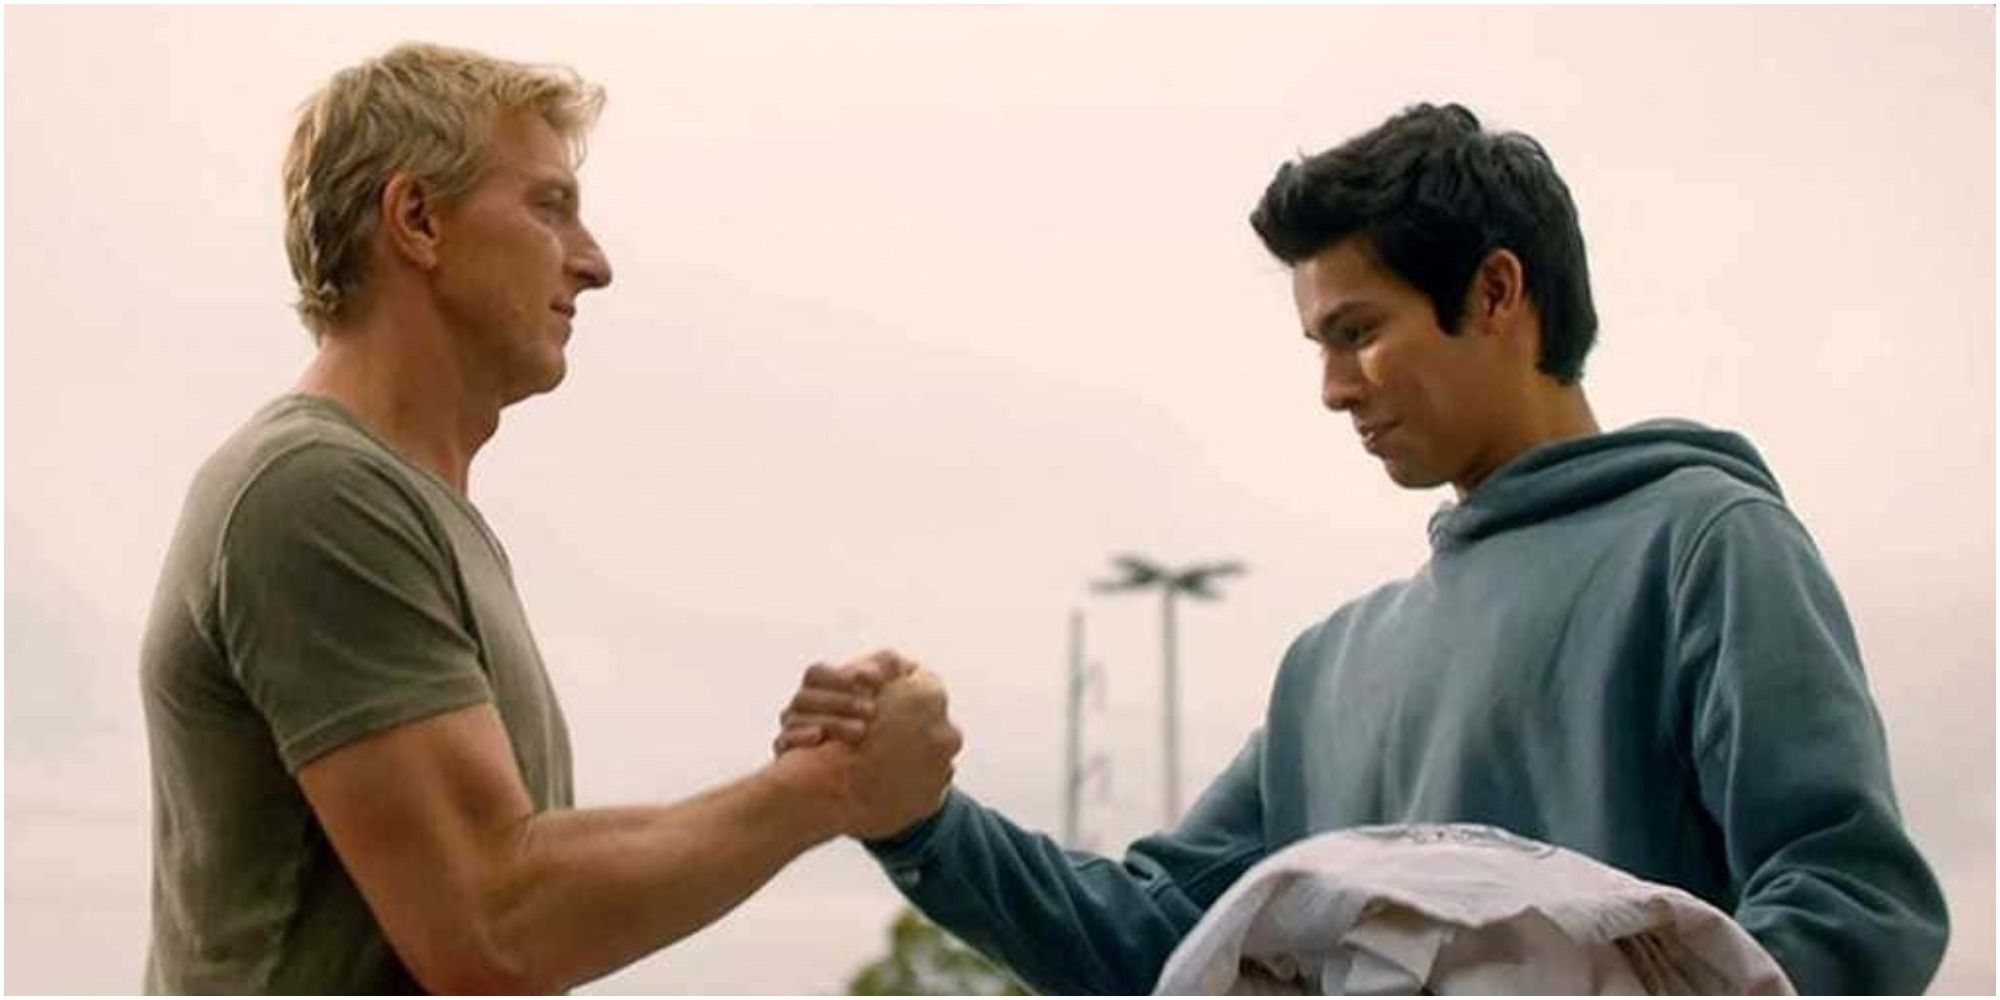 Johnny and Miguel clasping hands in Cobra Kai